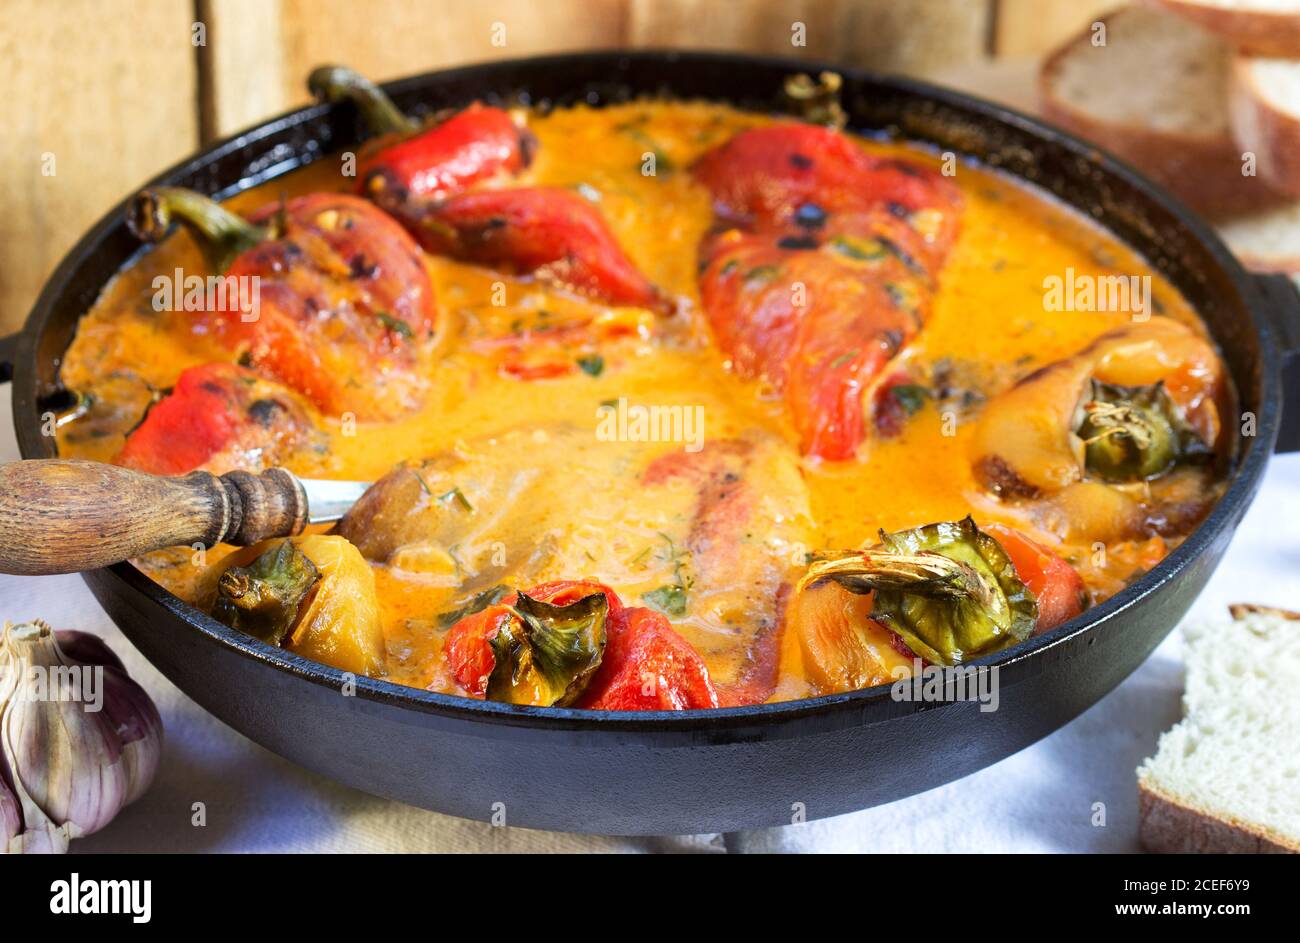 Sweet peppers in tomato and sour cream sauce, a traditional dish in some European countries. Rustic style. Stock Photo